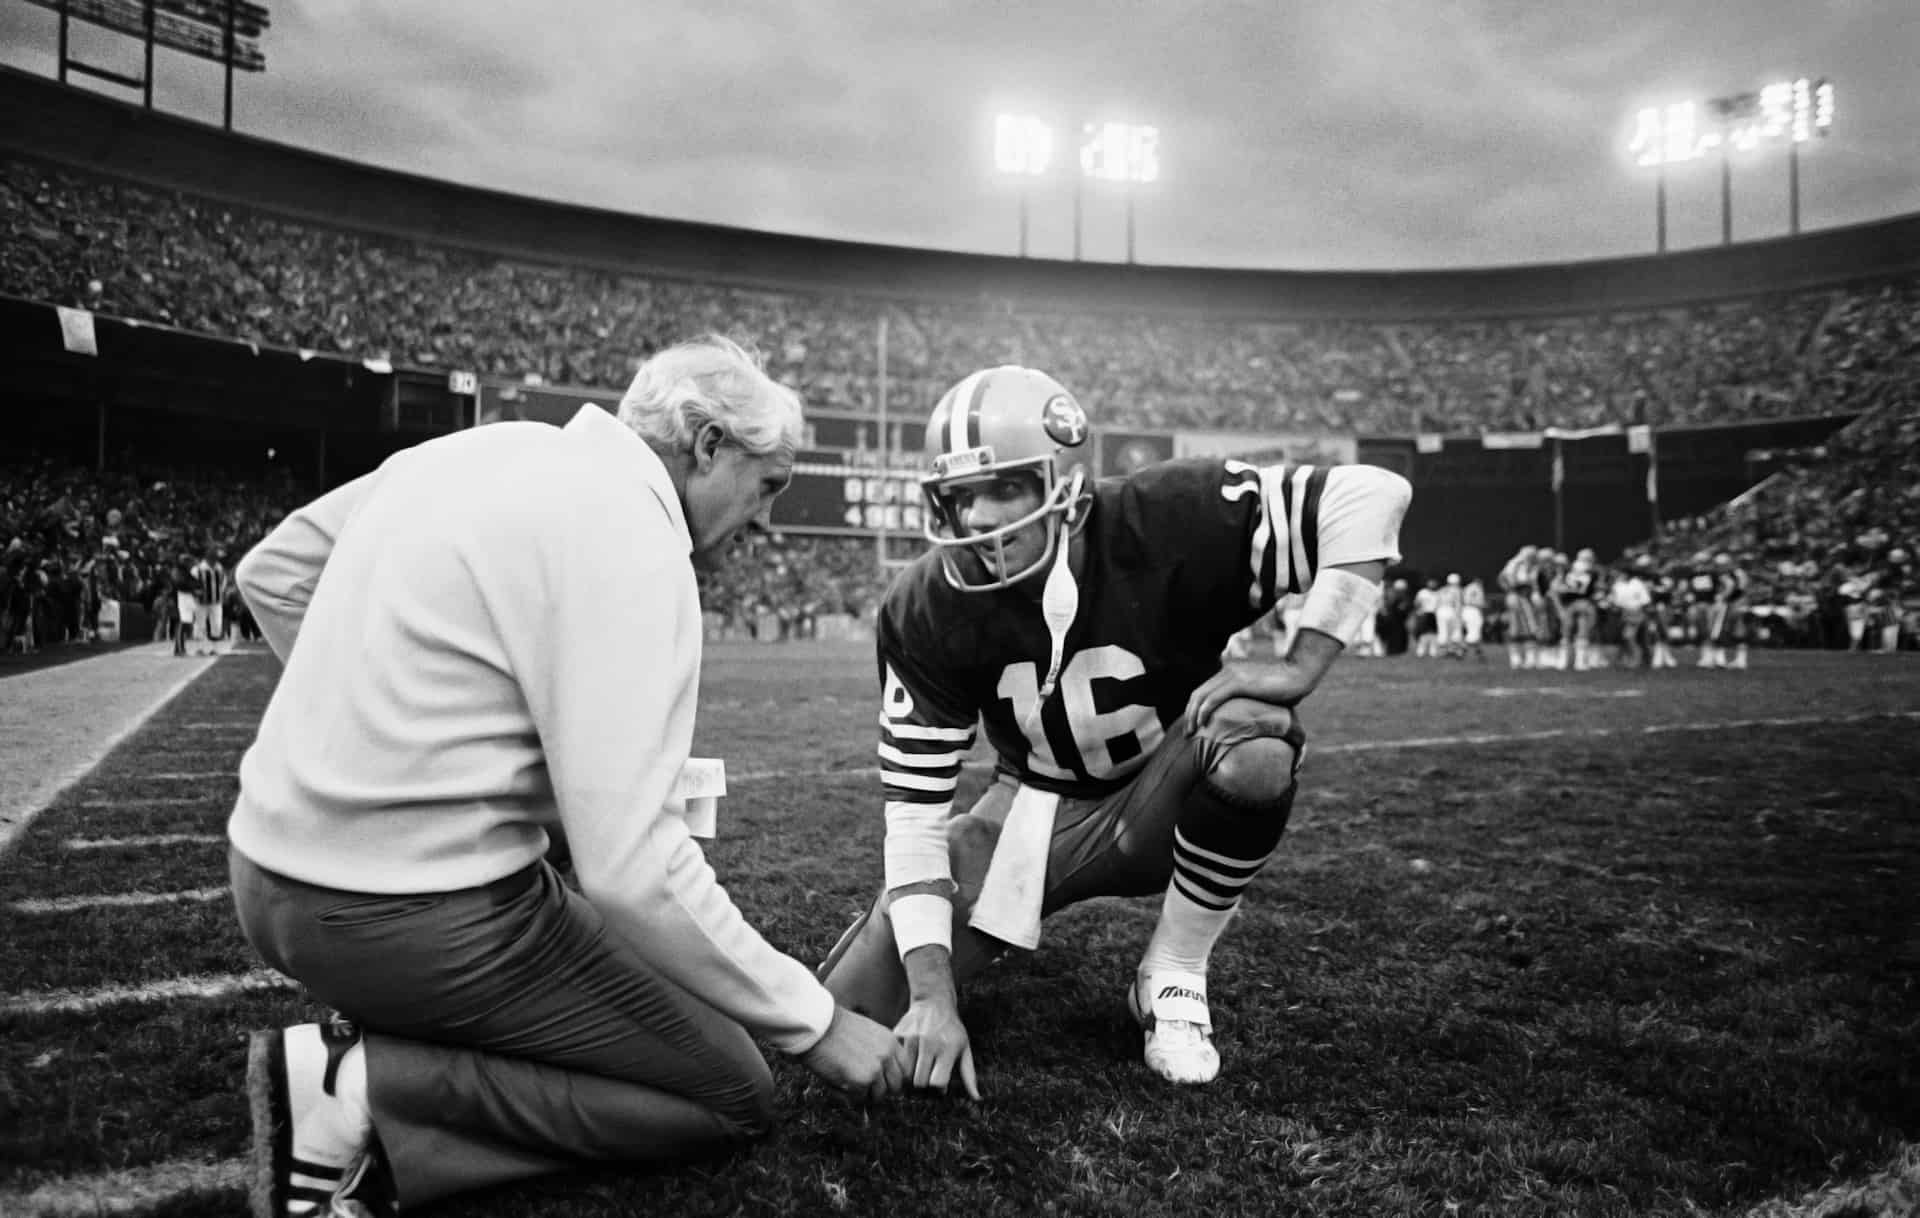 Joe Montana kneels at the field's edge to coordinate with the team's coach.